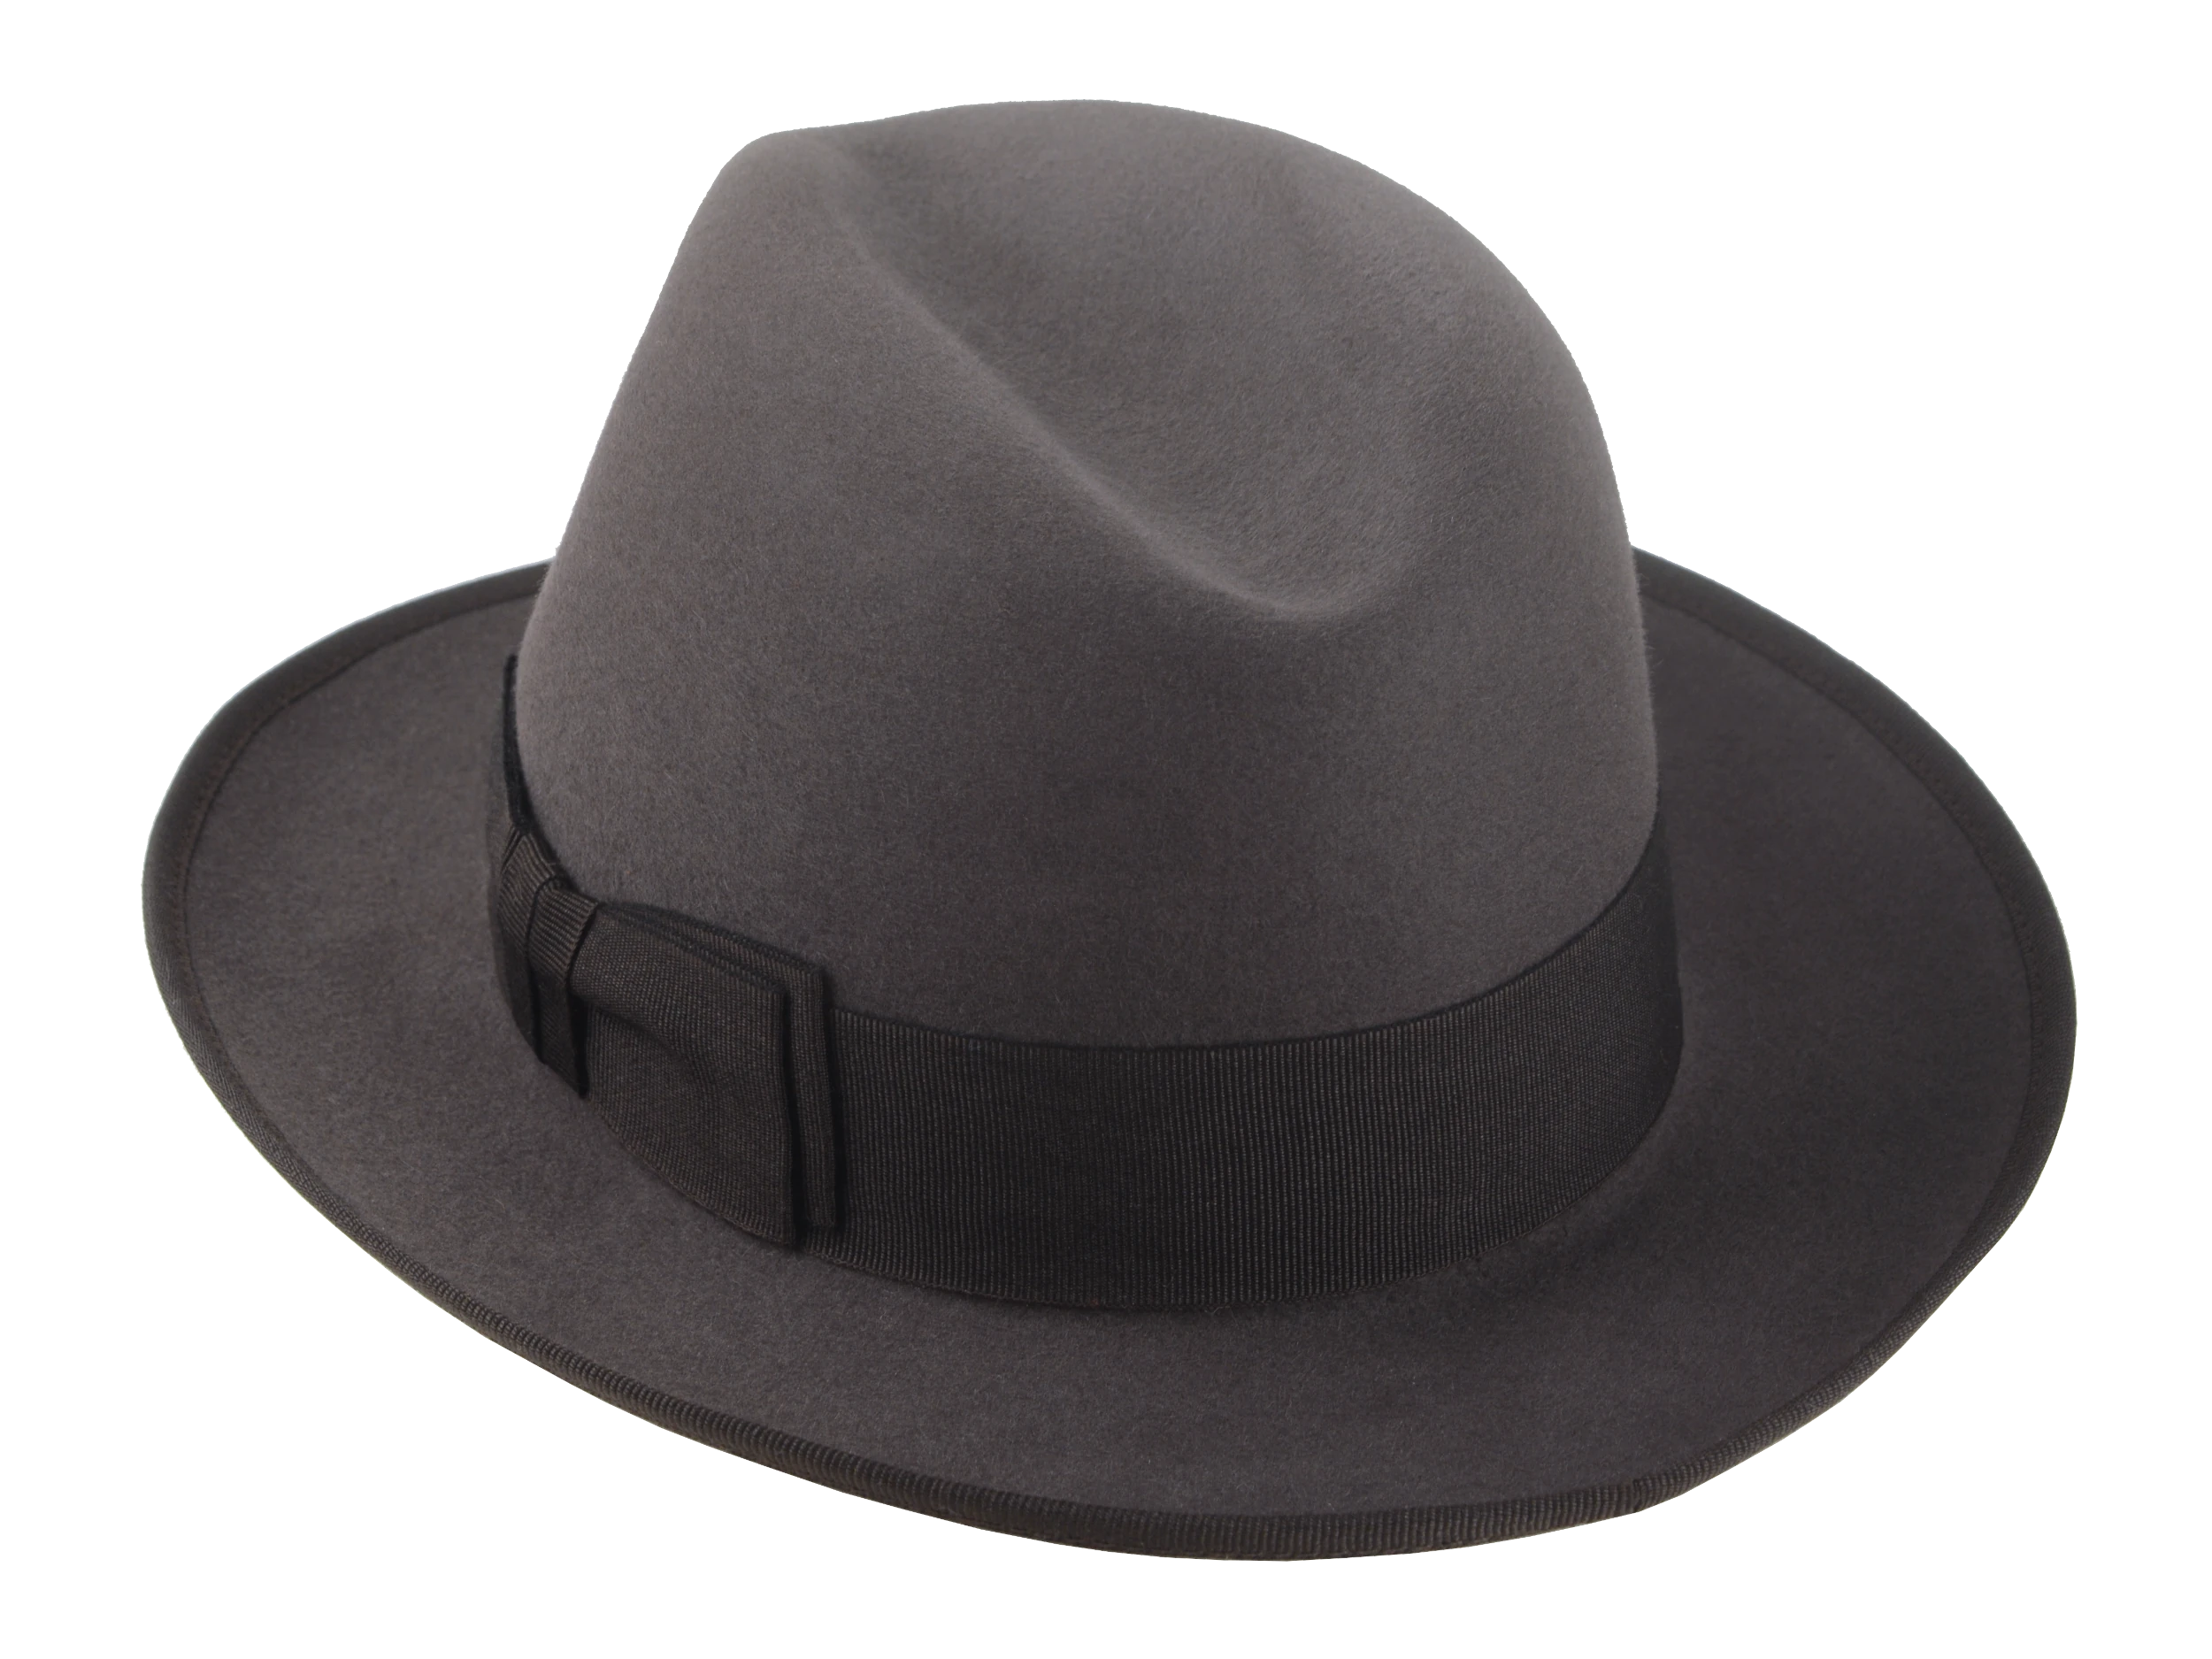 The Dogal: Fedora shown from the rear emphasizing its classic silhouette | Agnoulita Hats